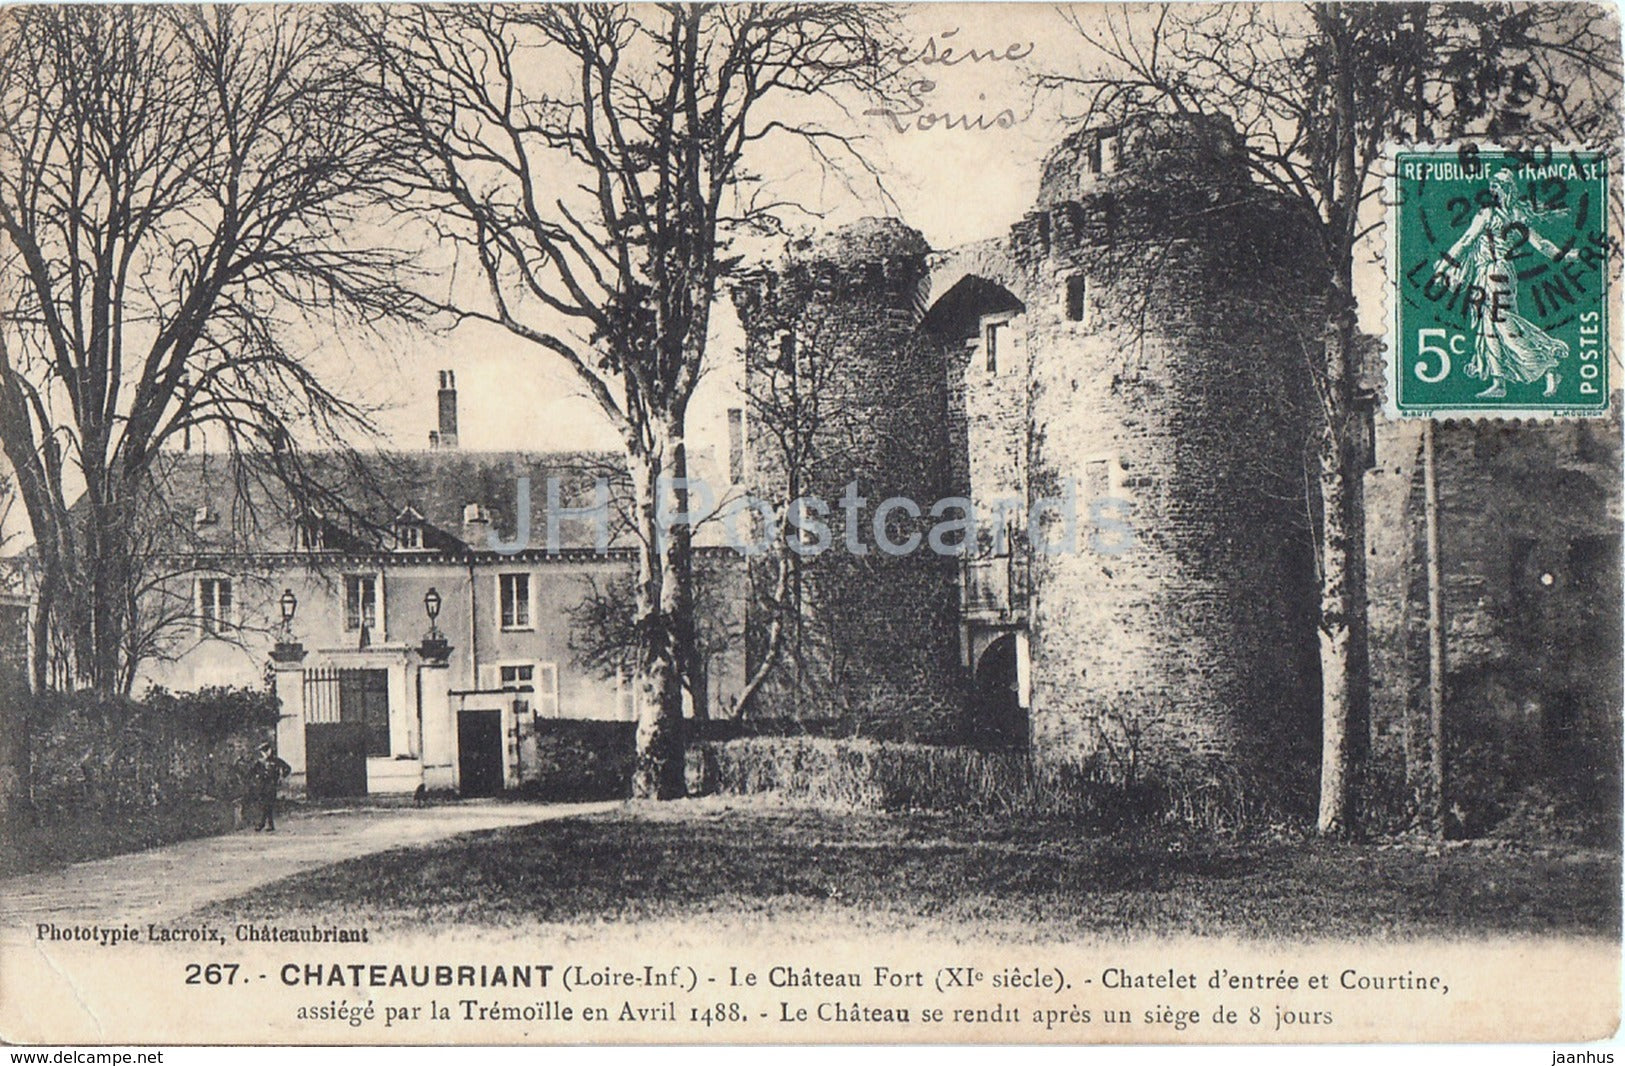 Chateaubriant - Le Chateau Fort - Chatelet d'entree et Courtine - castle - 267 - old postcard - 1912 - France - used - JH Postcards